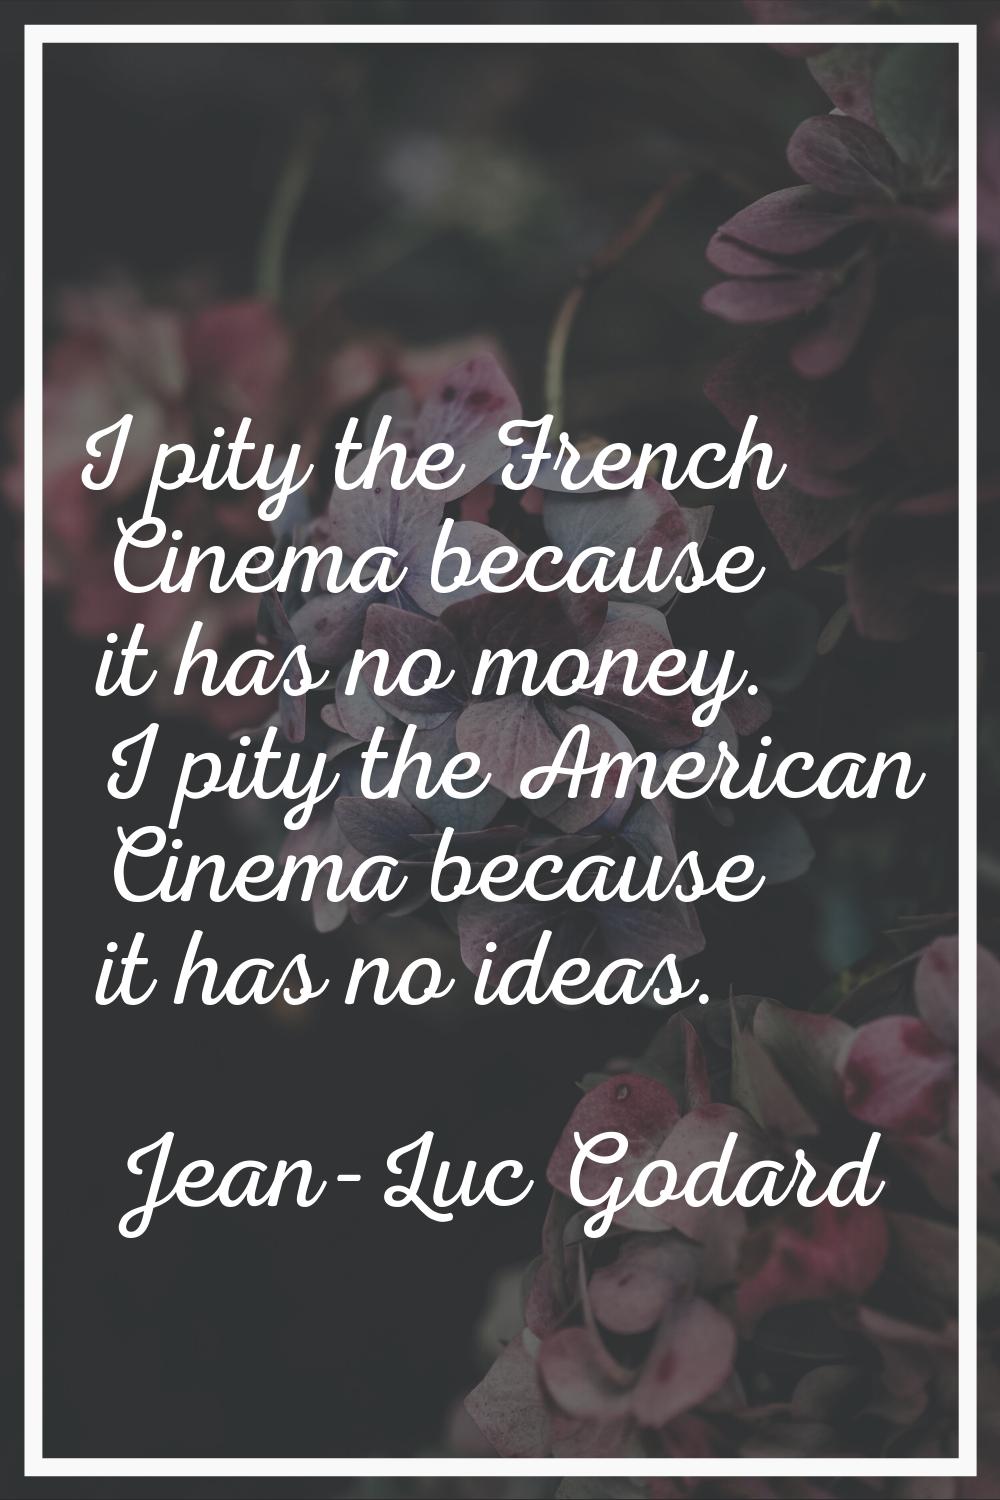 I pity the French Cinema because it has no money. I pity the American Cinema because it has no idea